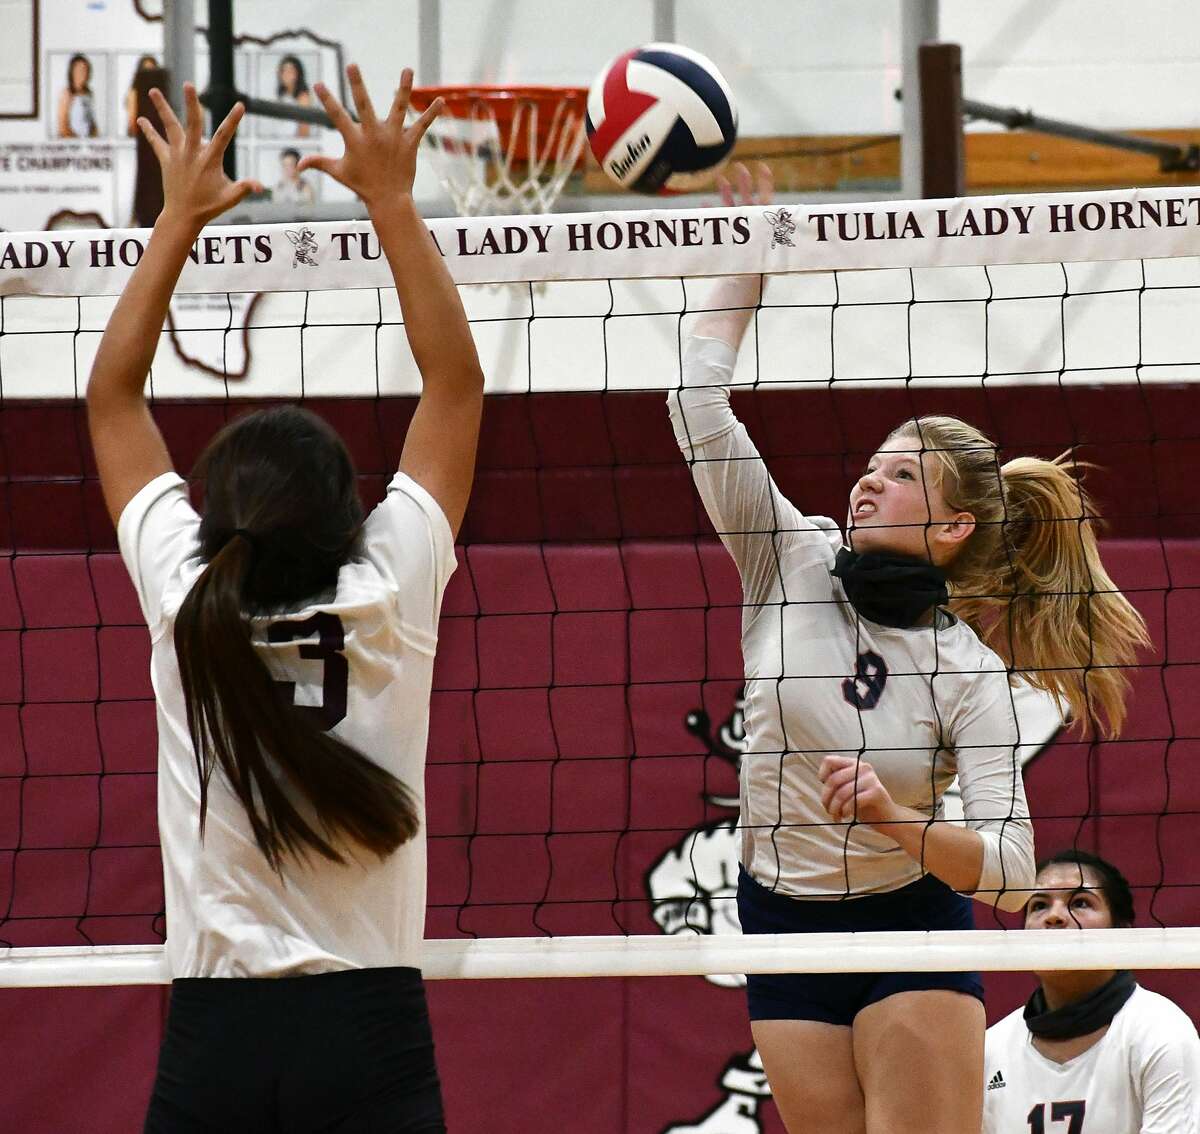 Plainview's Haley Curtis powers a kill past Tulia defender Allie Ramirez during their non-district high school volleyball match on Saturday, Sept. 19, 2020 in Tulia.